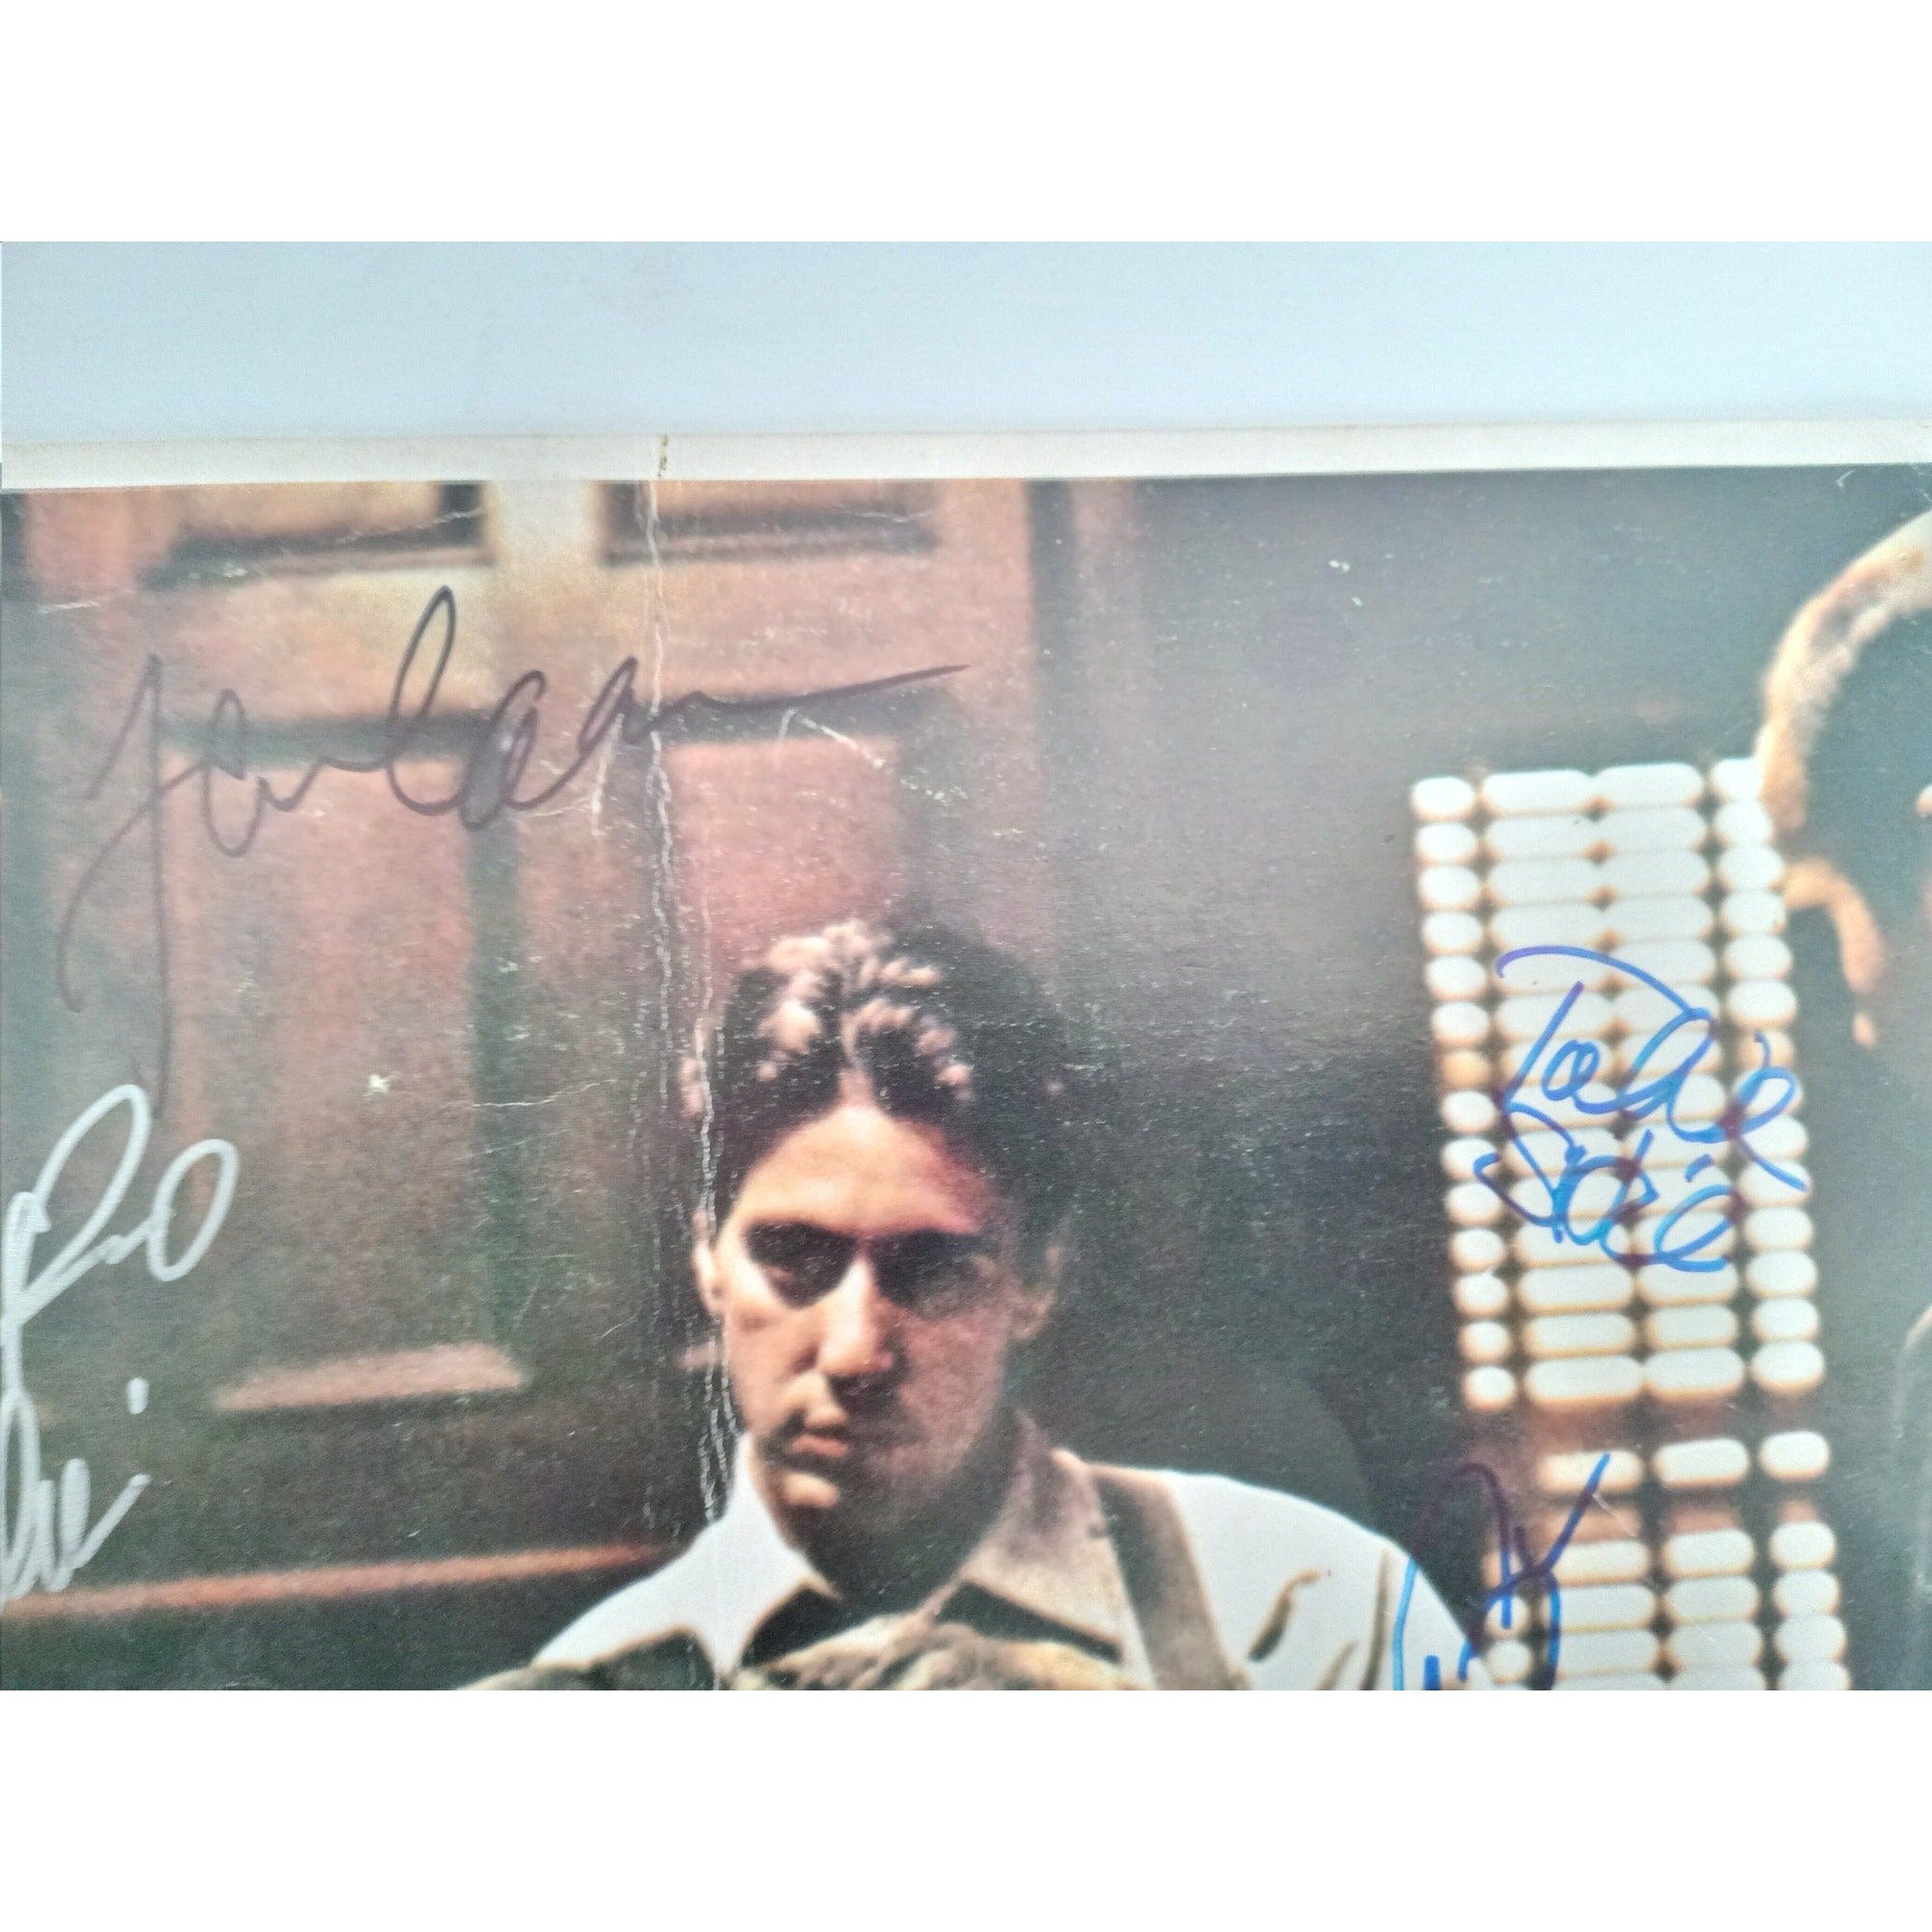 The Godfather Al Pacino, James Caan, Robert De Niro, Francis Ford Coppola, Robert Duvall signed with proof